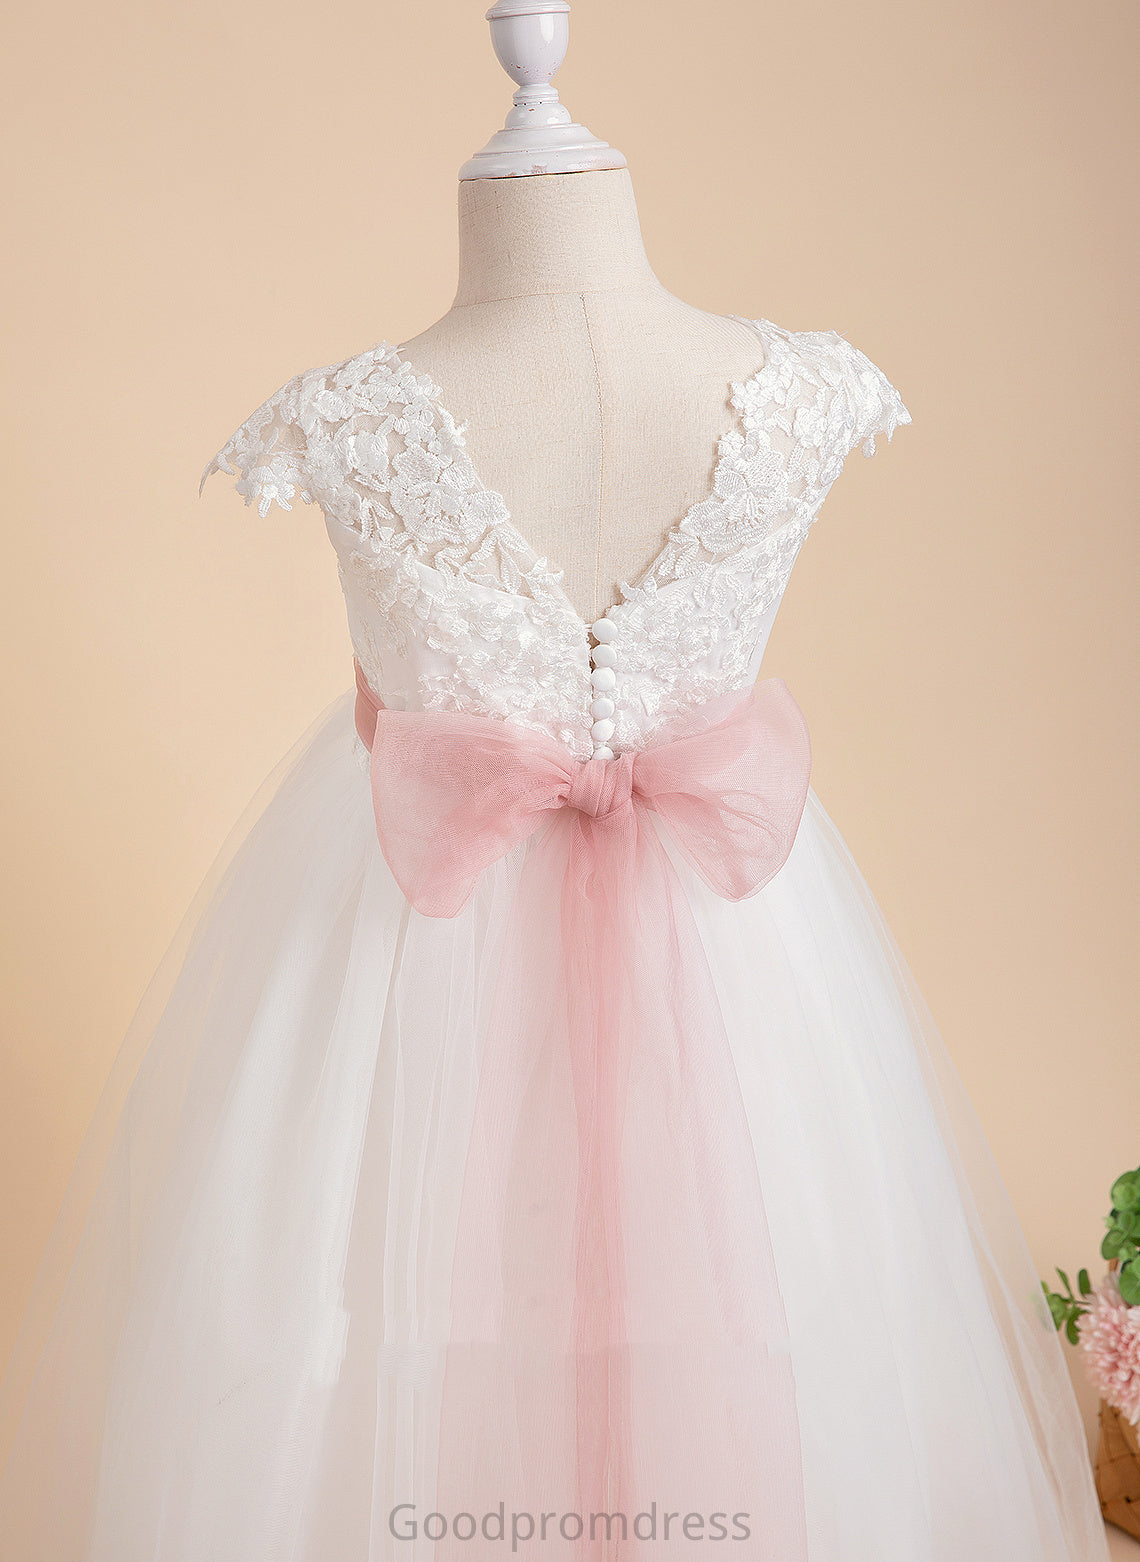 - Dress Floor-length Ella Scoop Neck With Lace Girl Lace/Sash Ball-Gown/Princess Flower Girl Dresses Flower Sleeveless